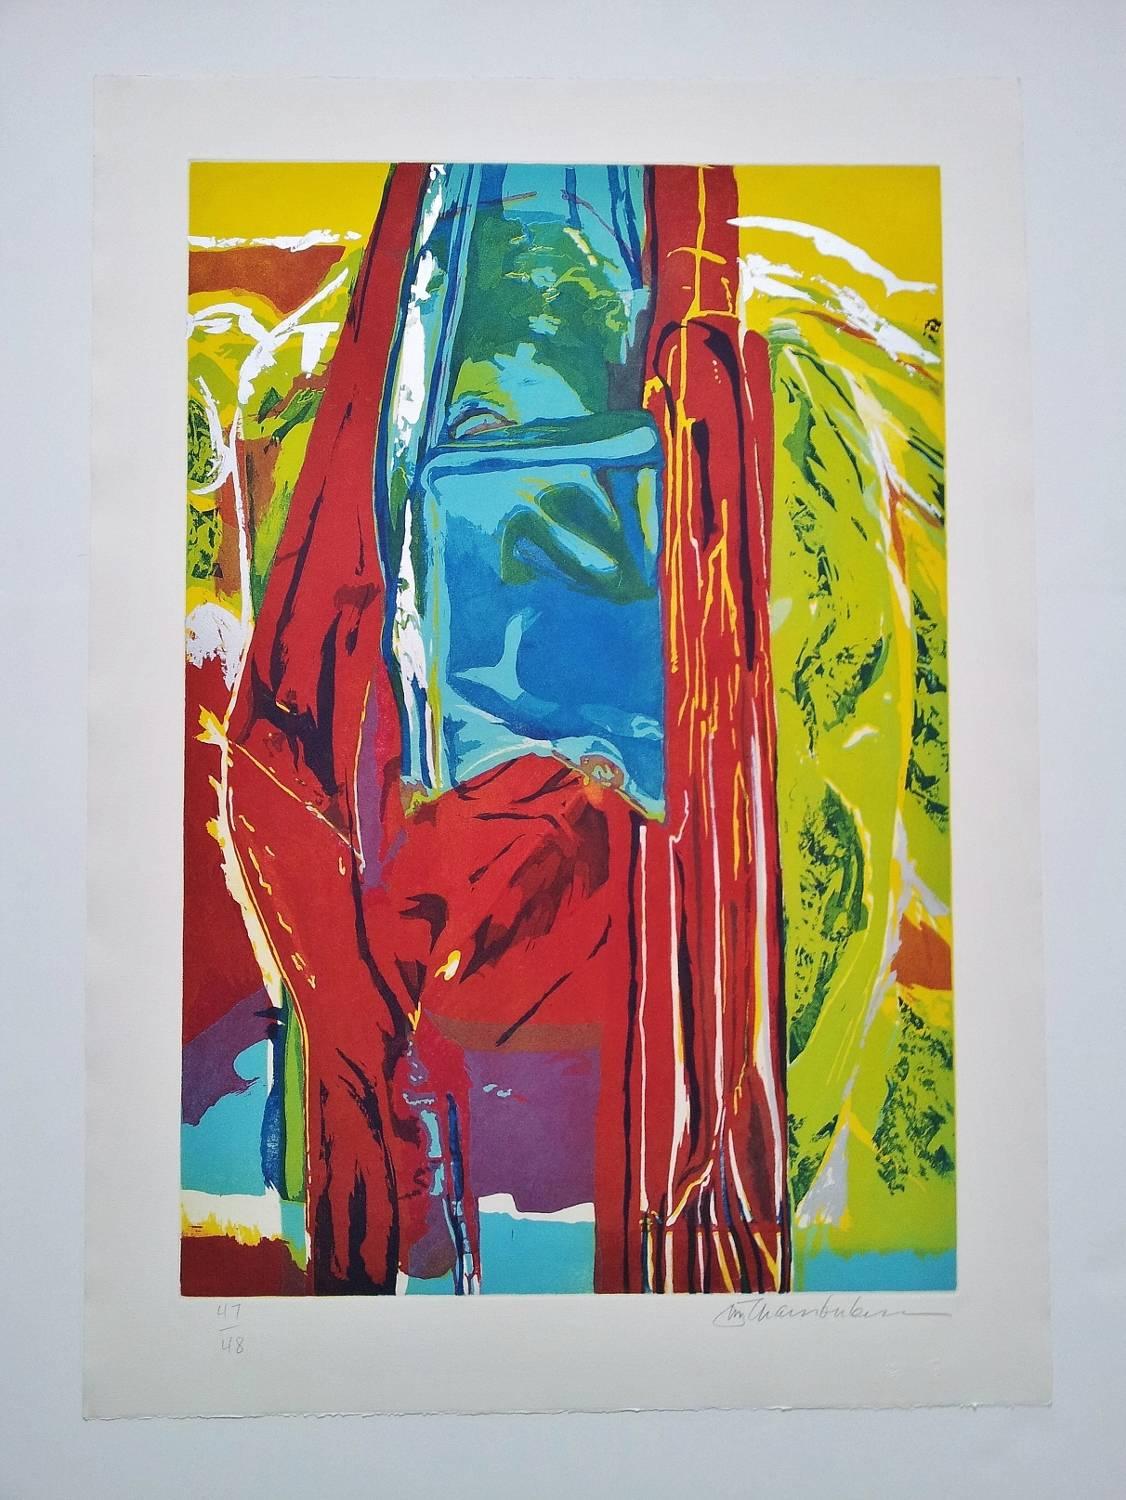 John chamberlain print 'Three Daughters, More Rain' original unframed print from the 'Natural Landscape' series, 1987, USA, number 47/48.

'Natural Landscape' is a series of four John Chamberlain contemporary prints with impressions from